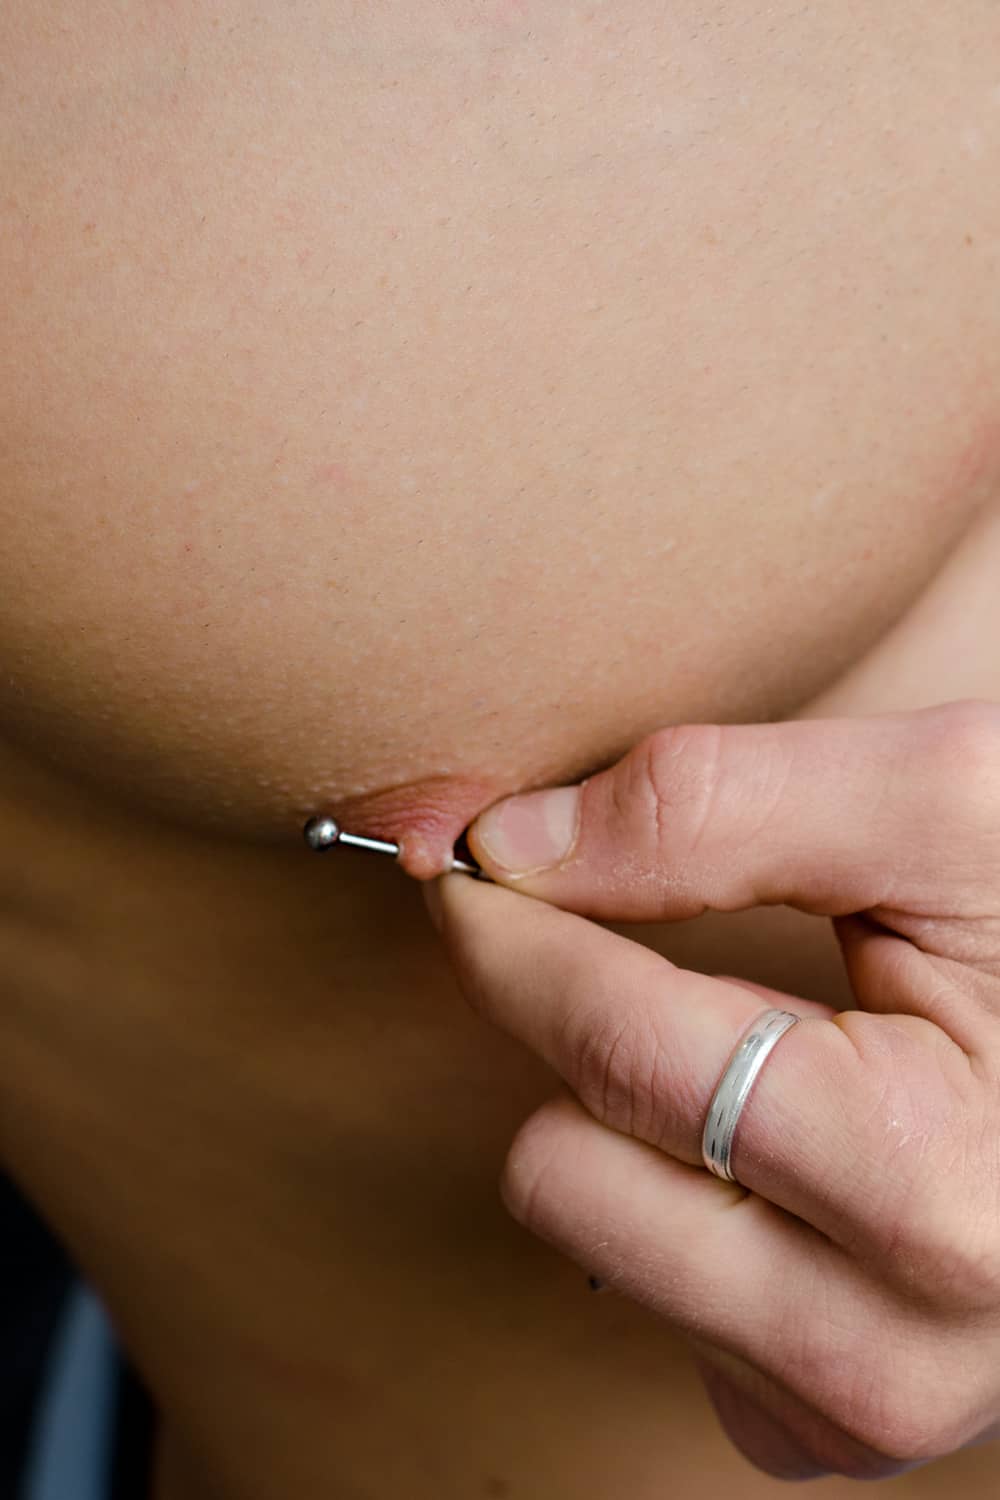 How to safely change your nipple ring